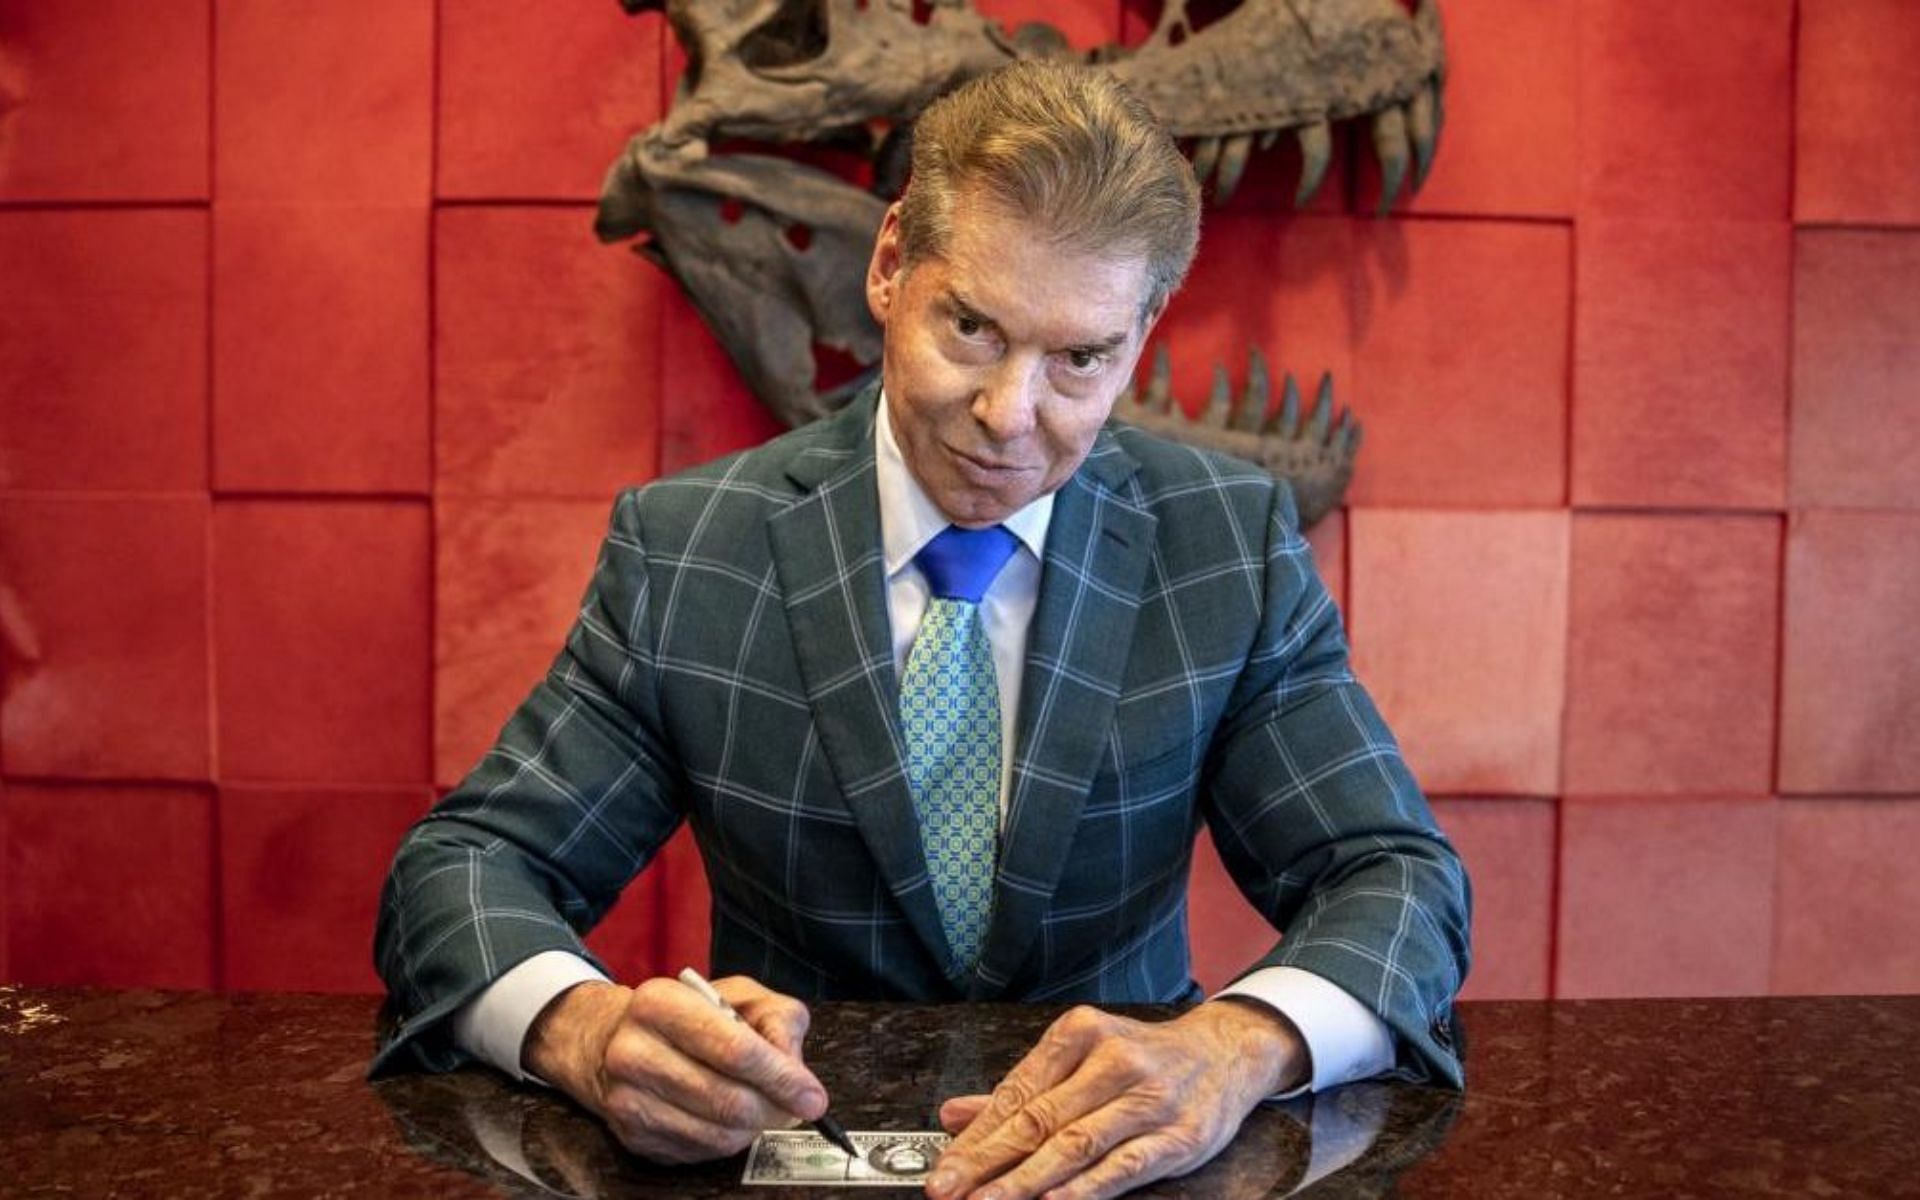 Vince McMahon is the former WWE Chairman